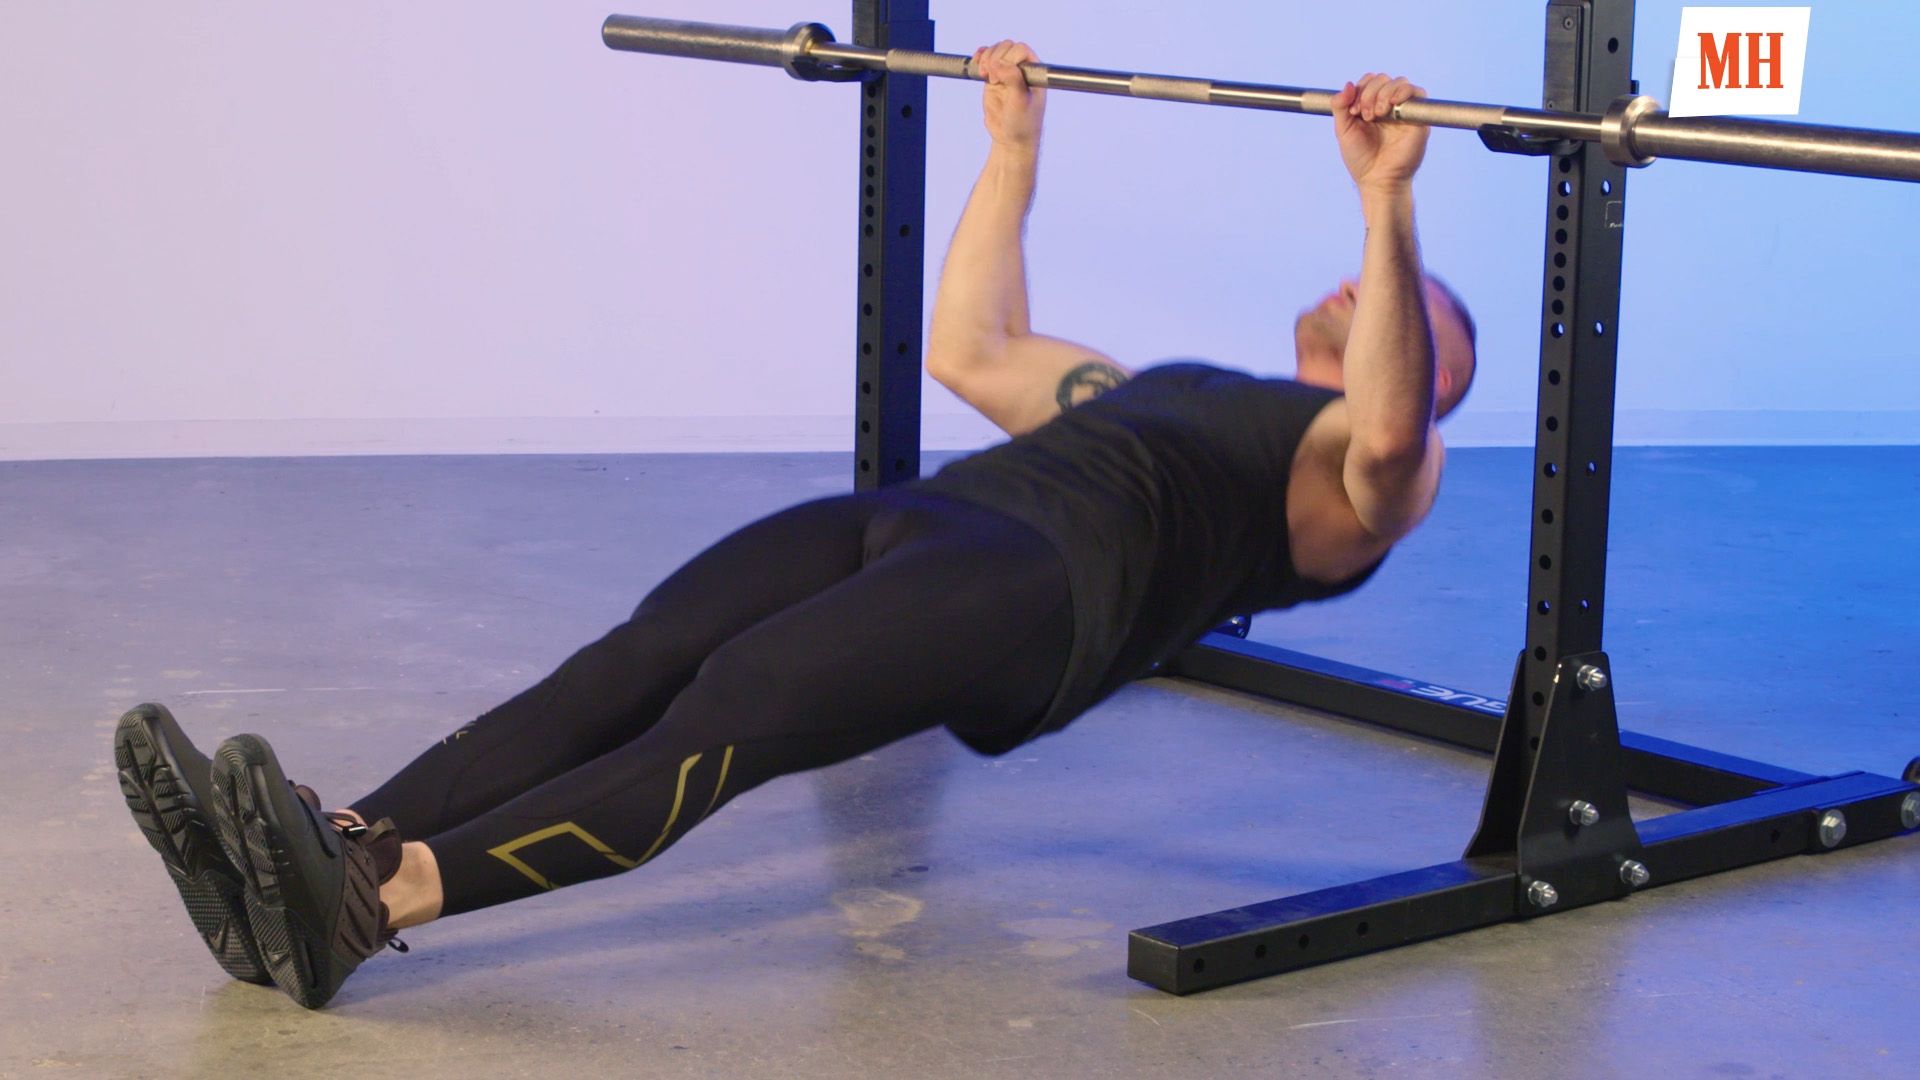 inverted row exercise